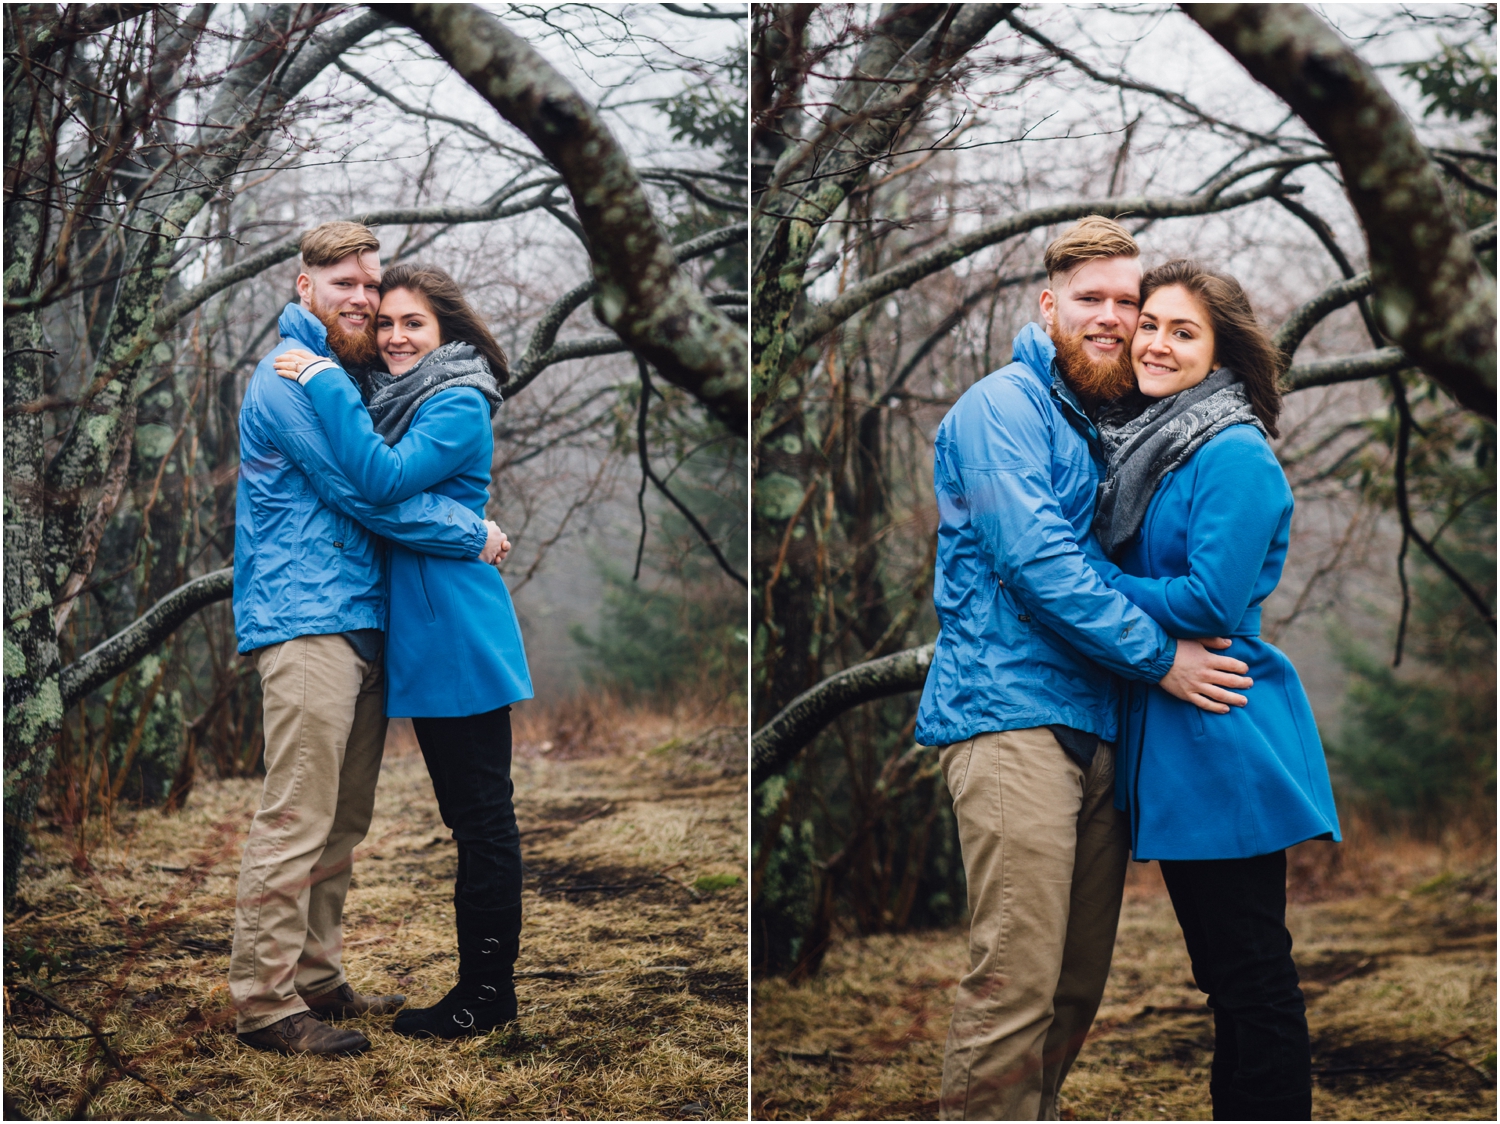 katy-sergent-photography-grayson-highlands-engagement-session-mouth-of-wilson-virginia-damascus-appalachian-trail-tennessee-wedding-elopement_0005.jpg